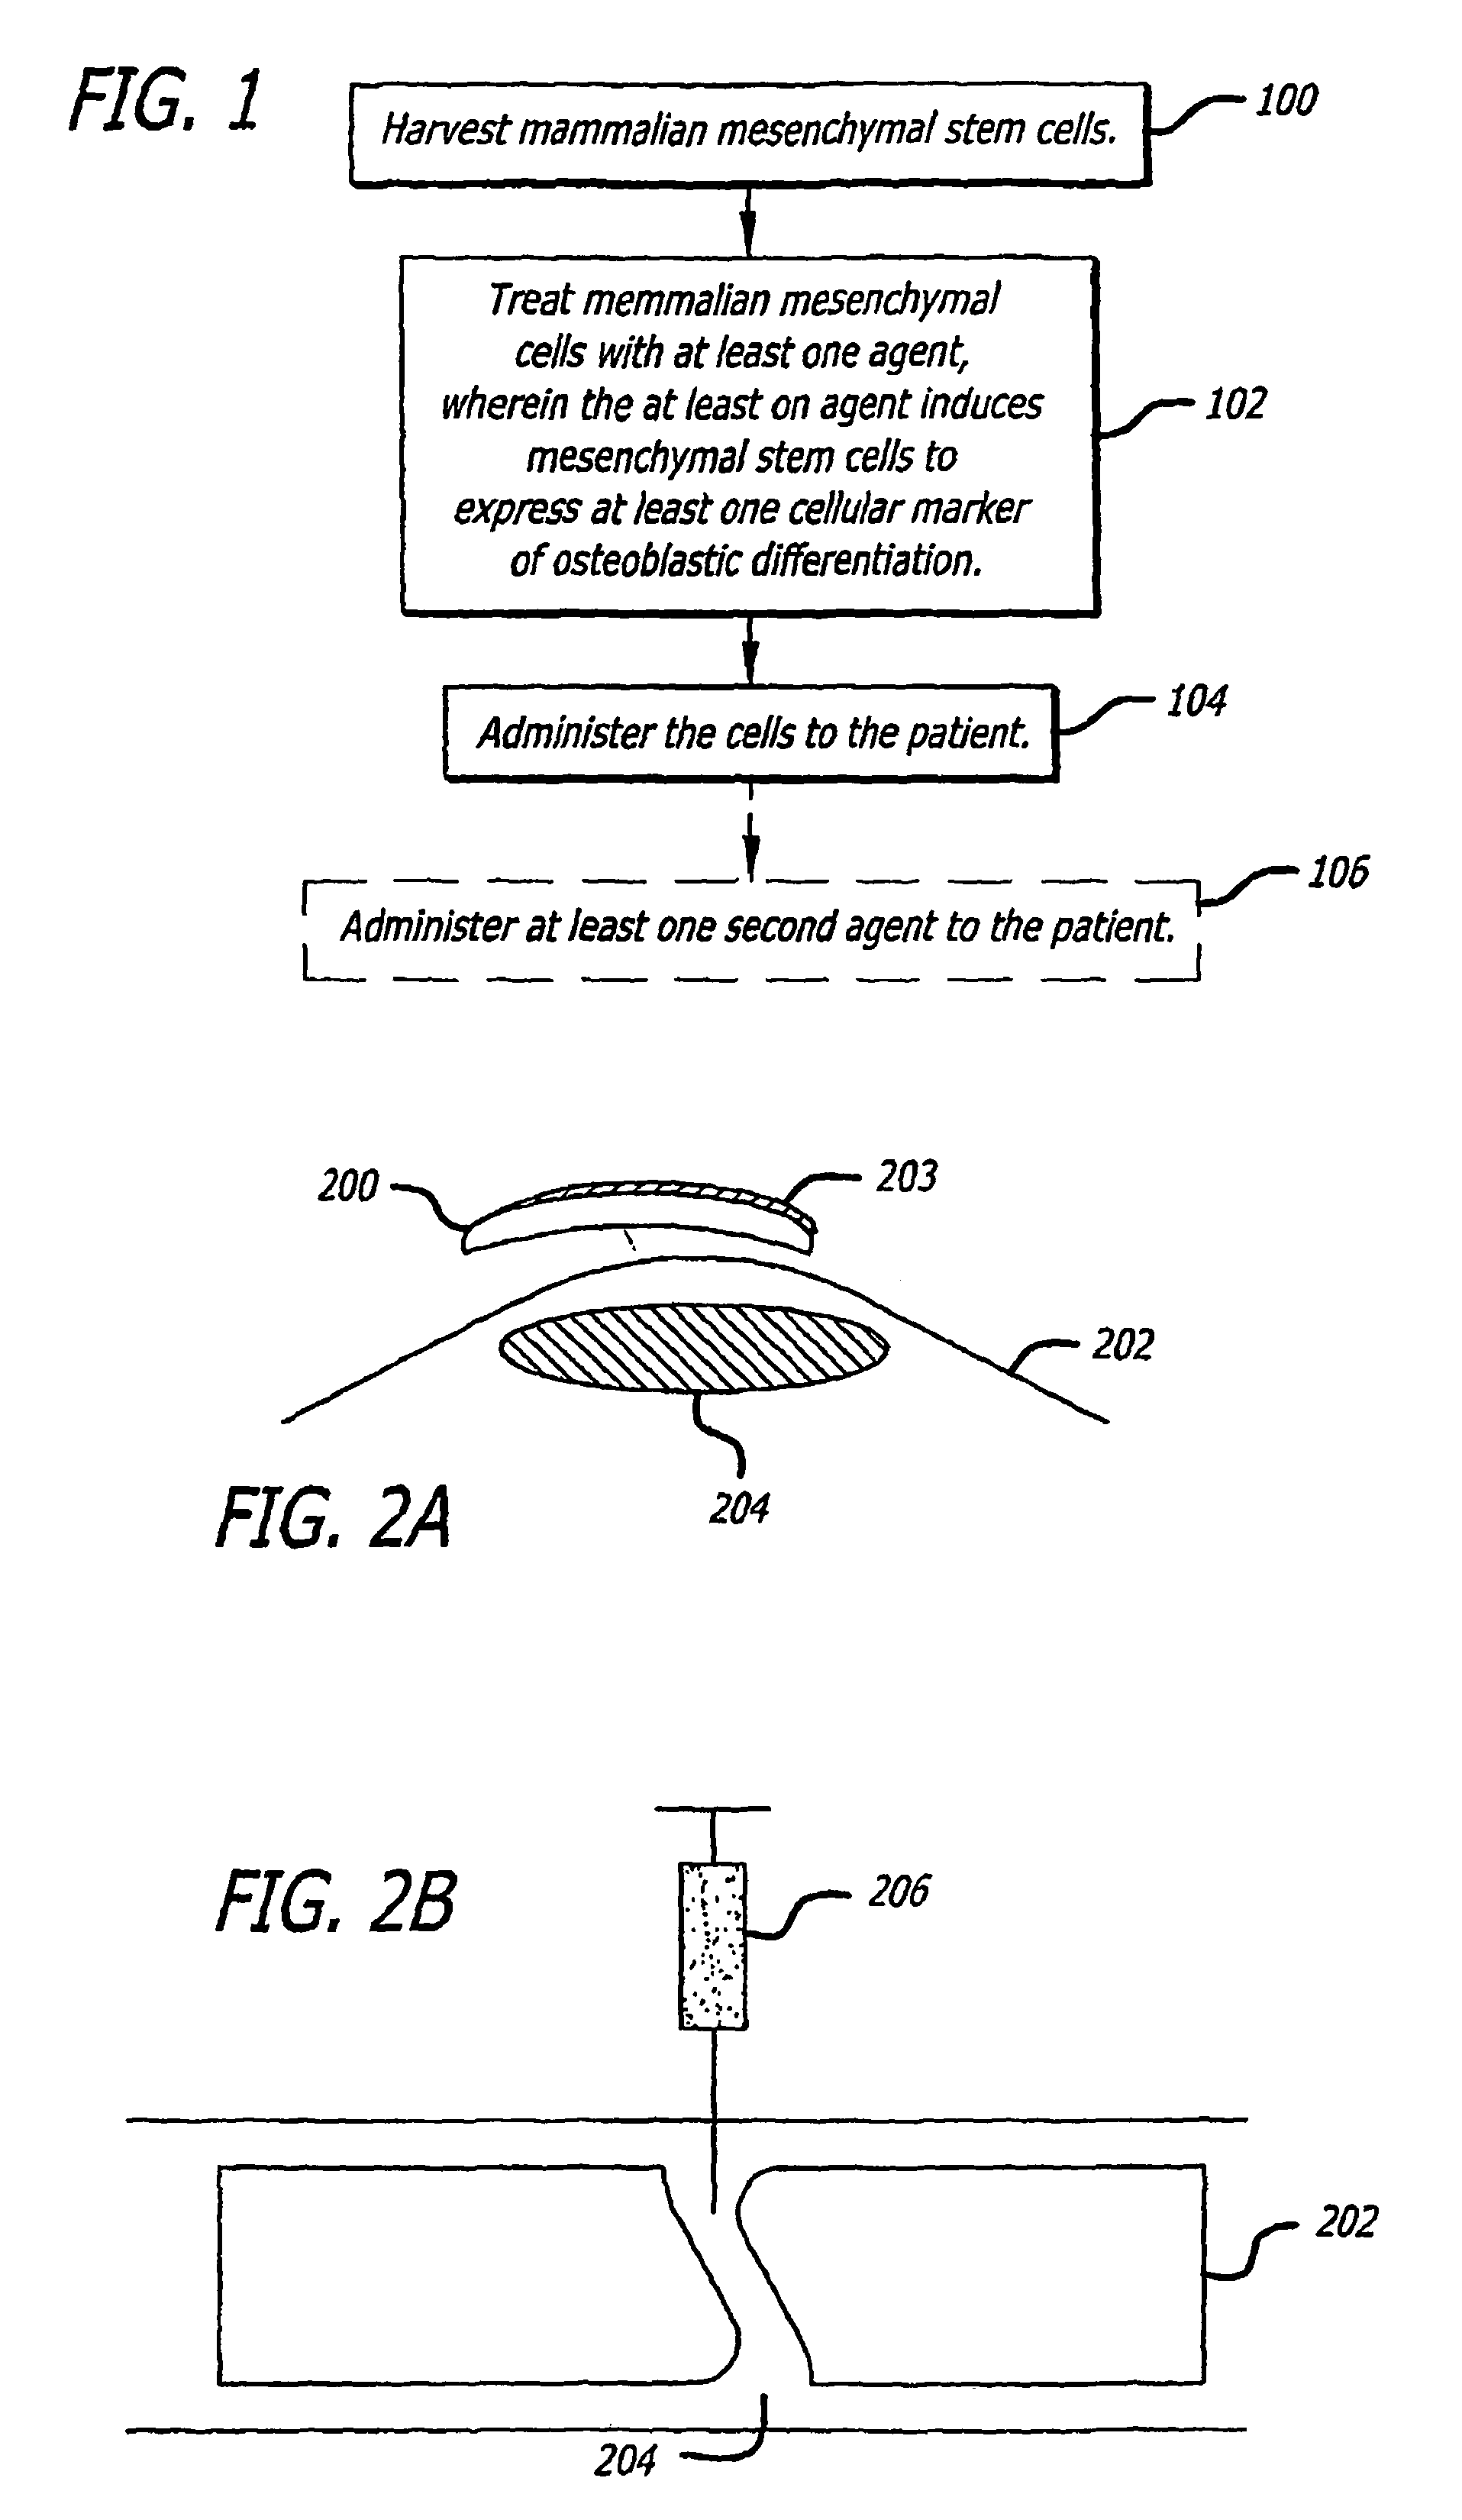 Agents and methods for enhancing bone formation